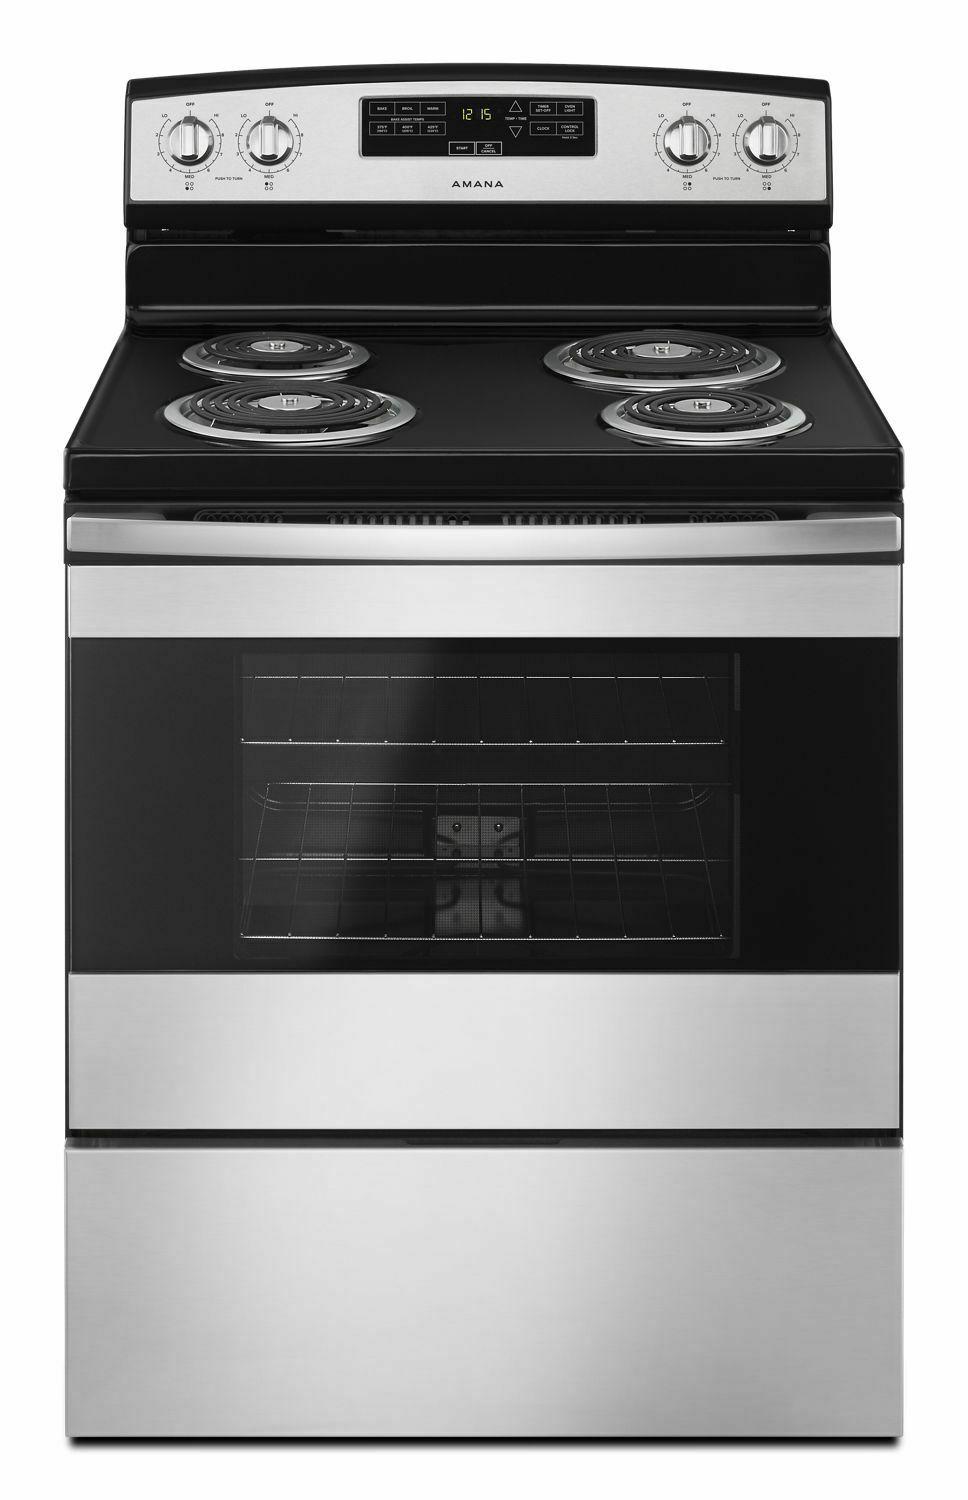 30-inch Amana® Electric Range with Bake Assist Temps - Black-on-Stainless